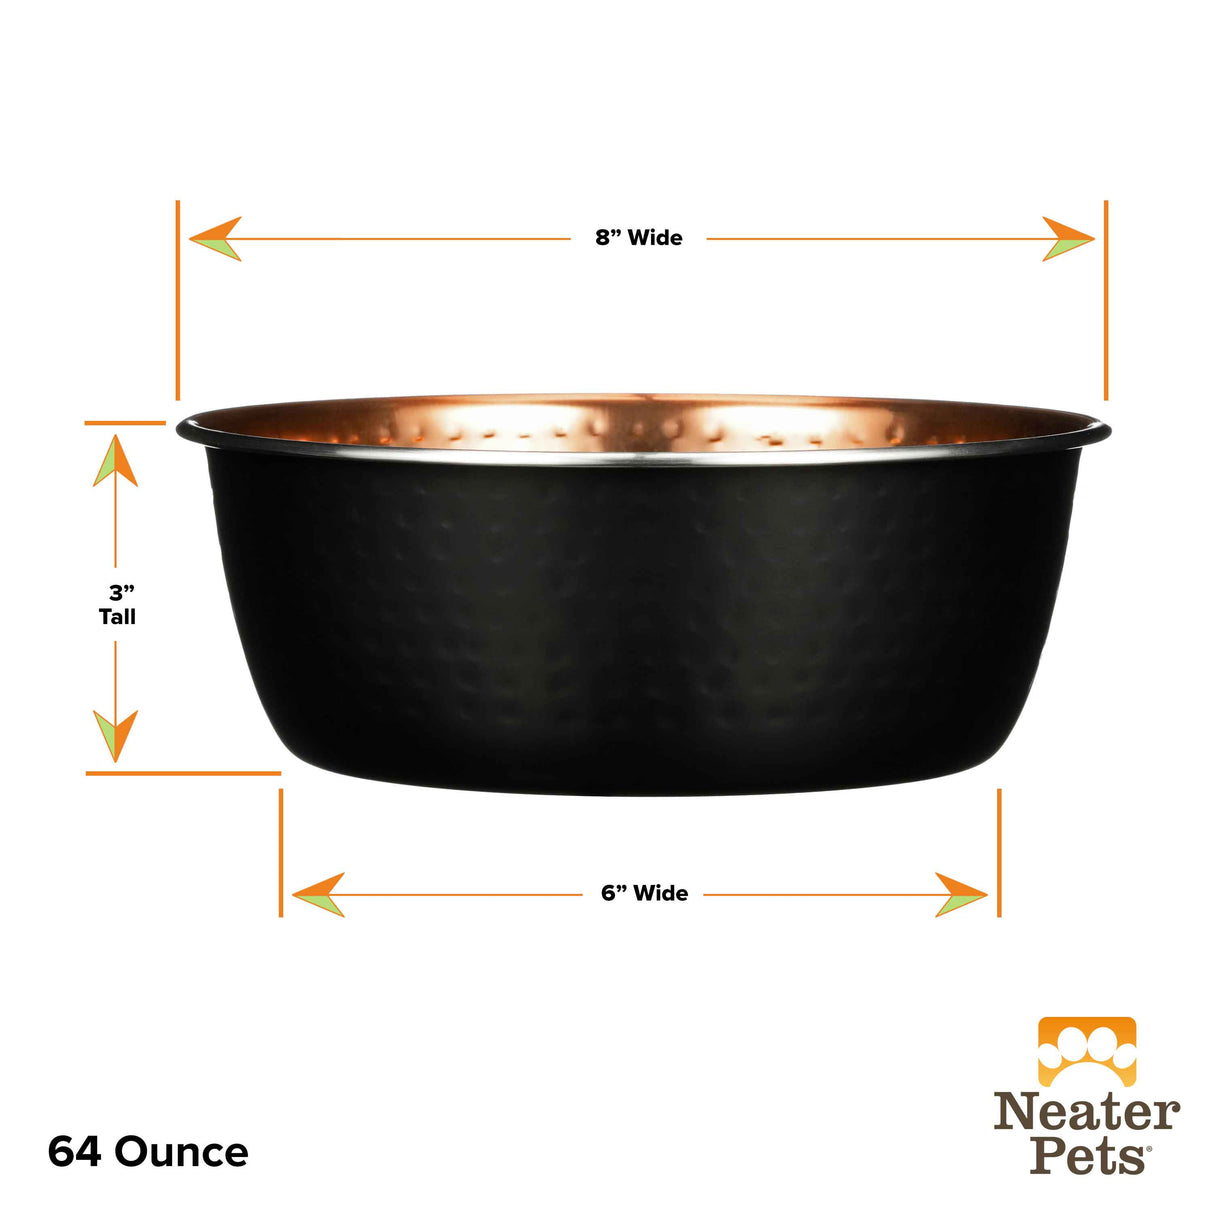 64 ounce sizing guide for Black Hammered Copper Bowl